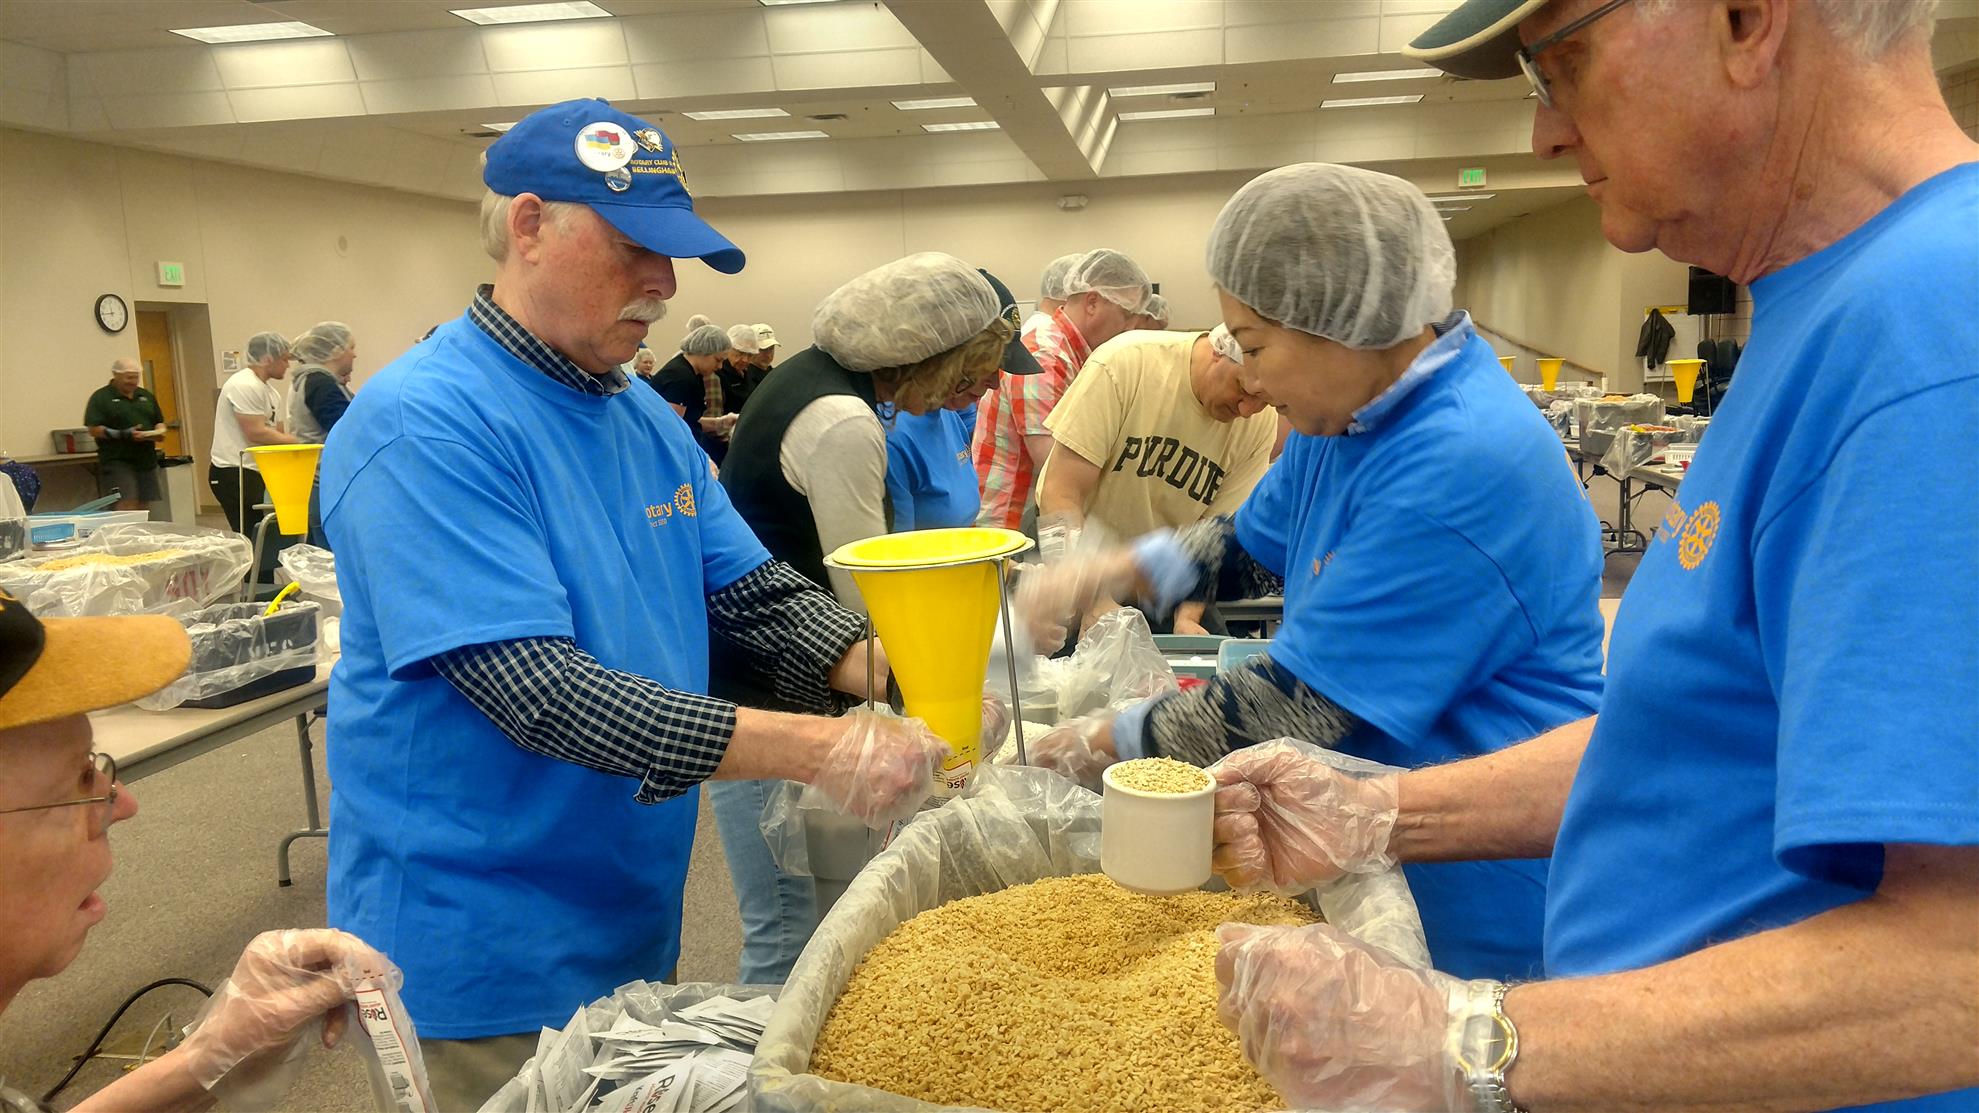 Meal Packing Event for the Rotary Club of Bellingham